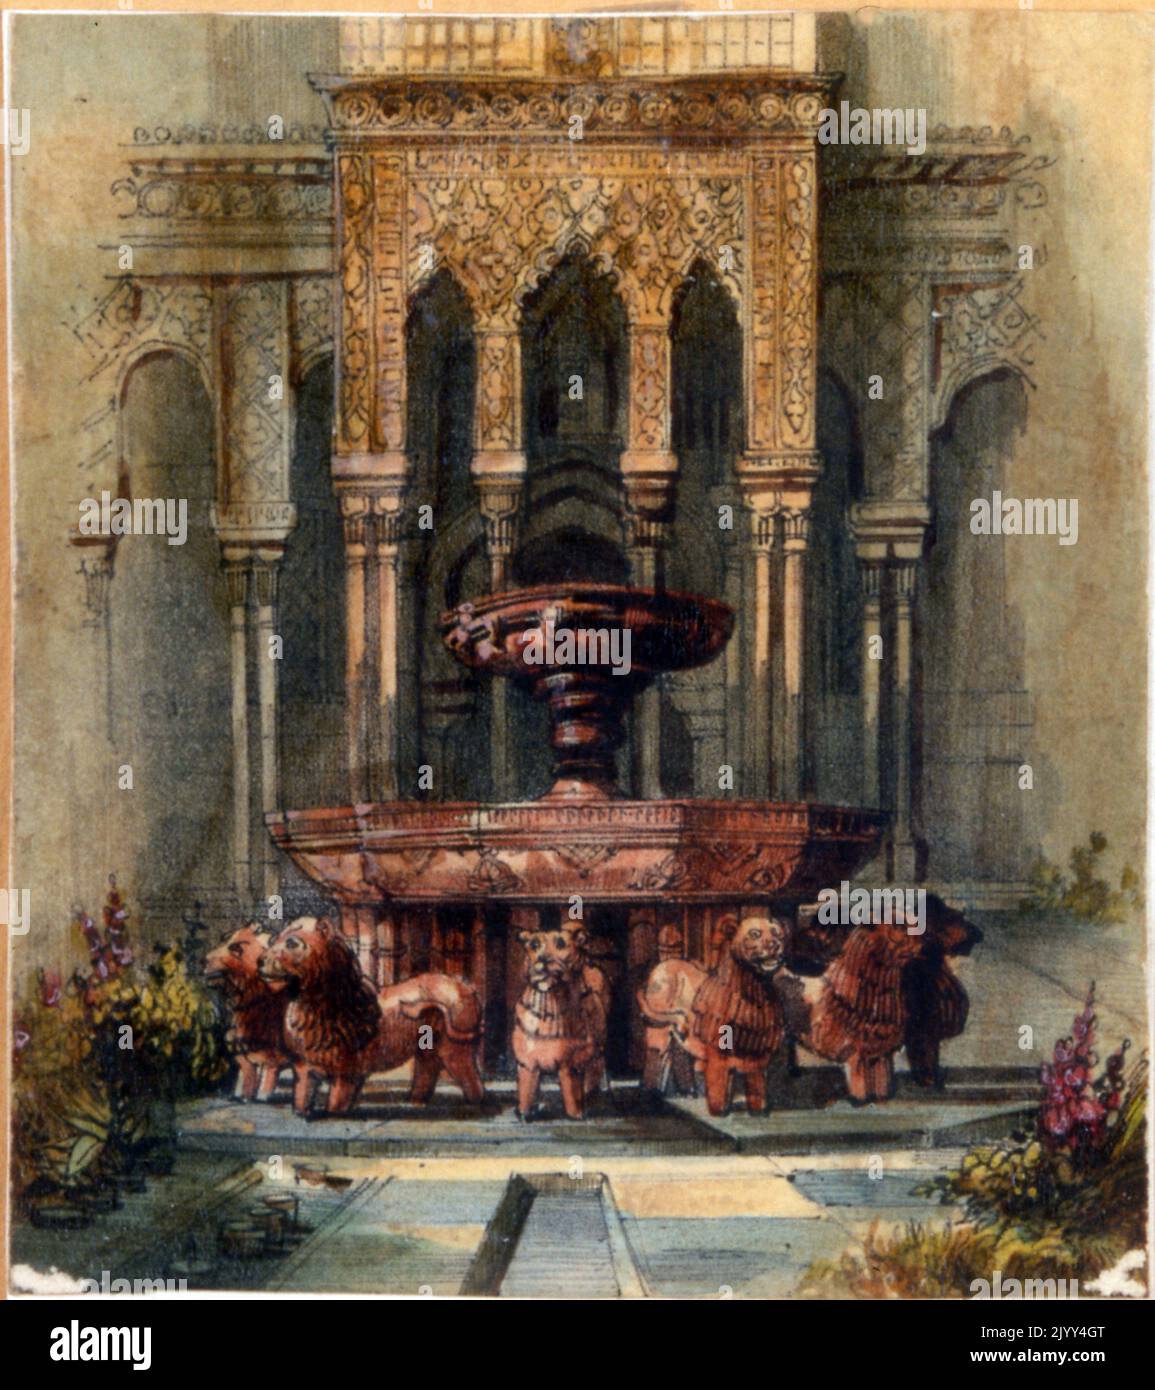 Moroccan Fountain', 1835. gouache, Painted by Aurore Amadine Lucie Dupin (1804-1876) French novelist and feminist who wrote under the name of George Sand. Stock Photo